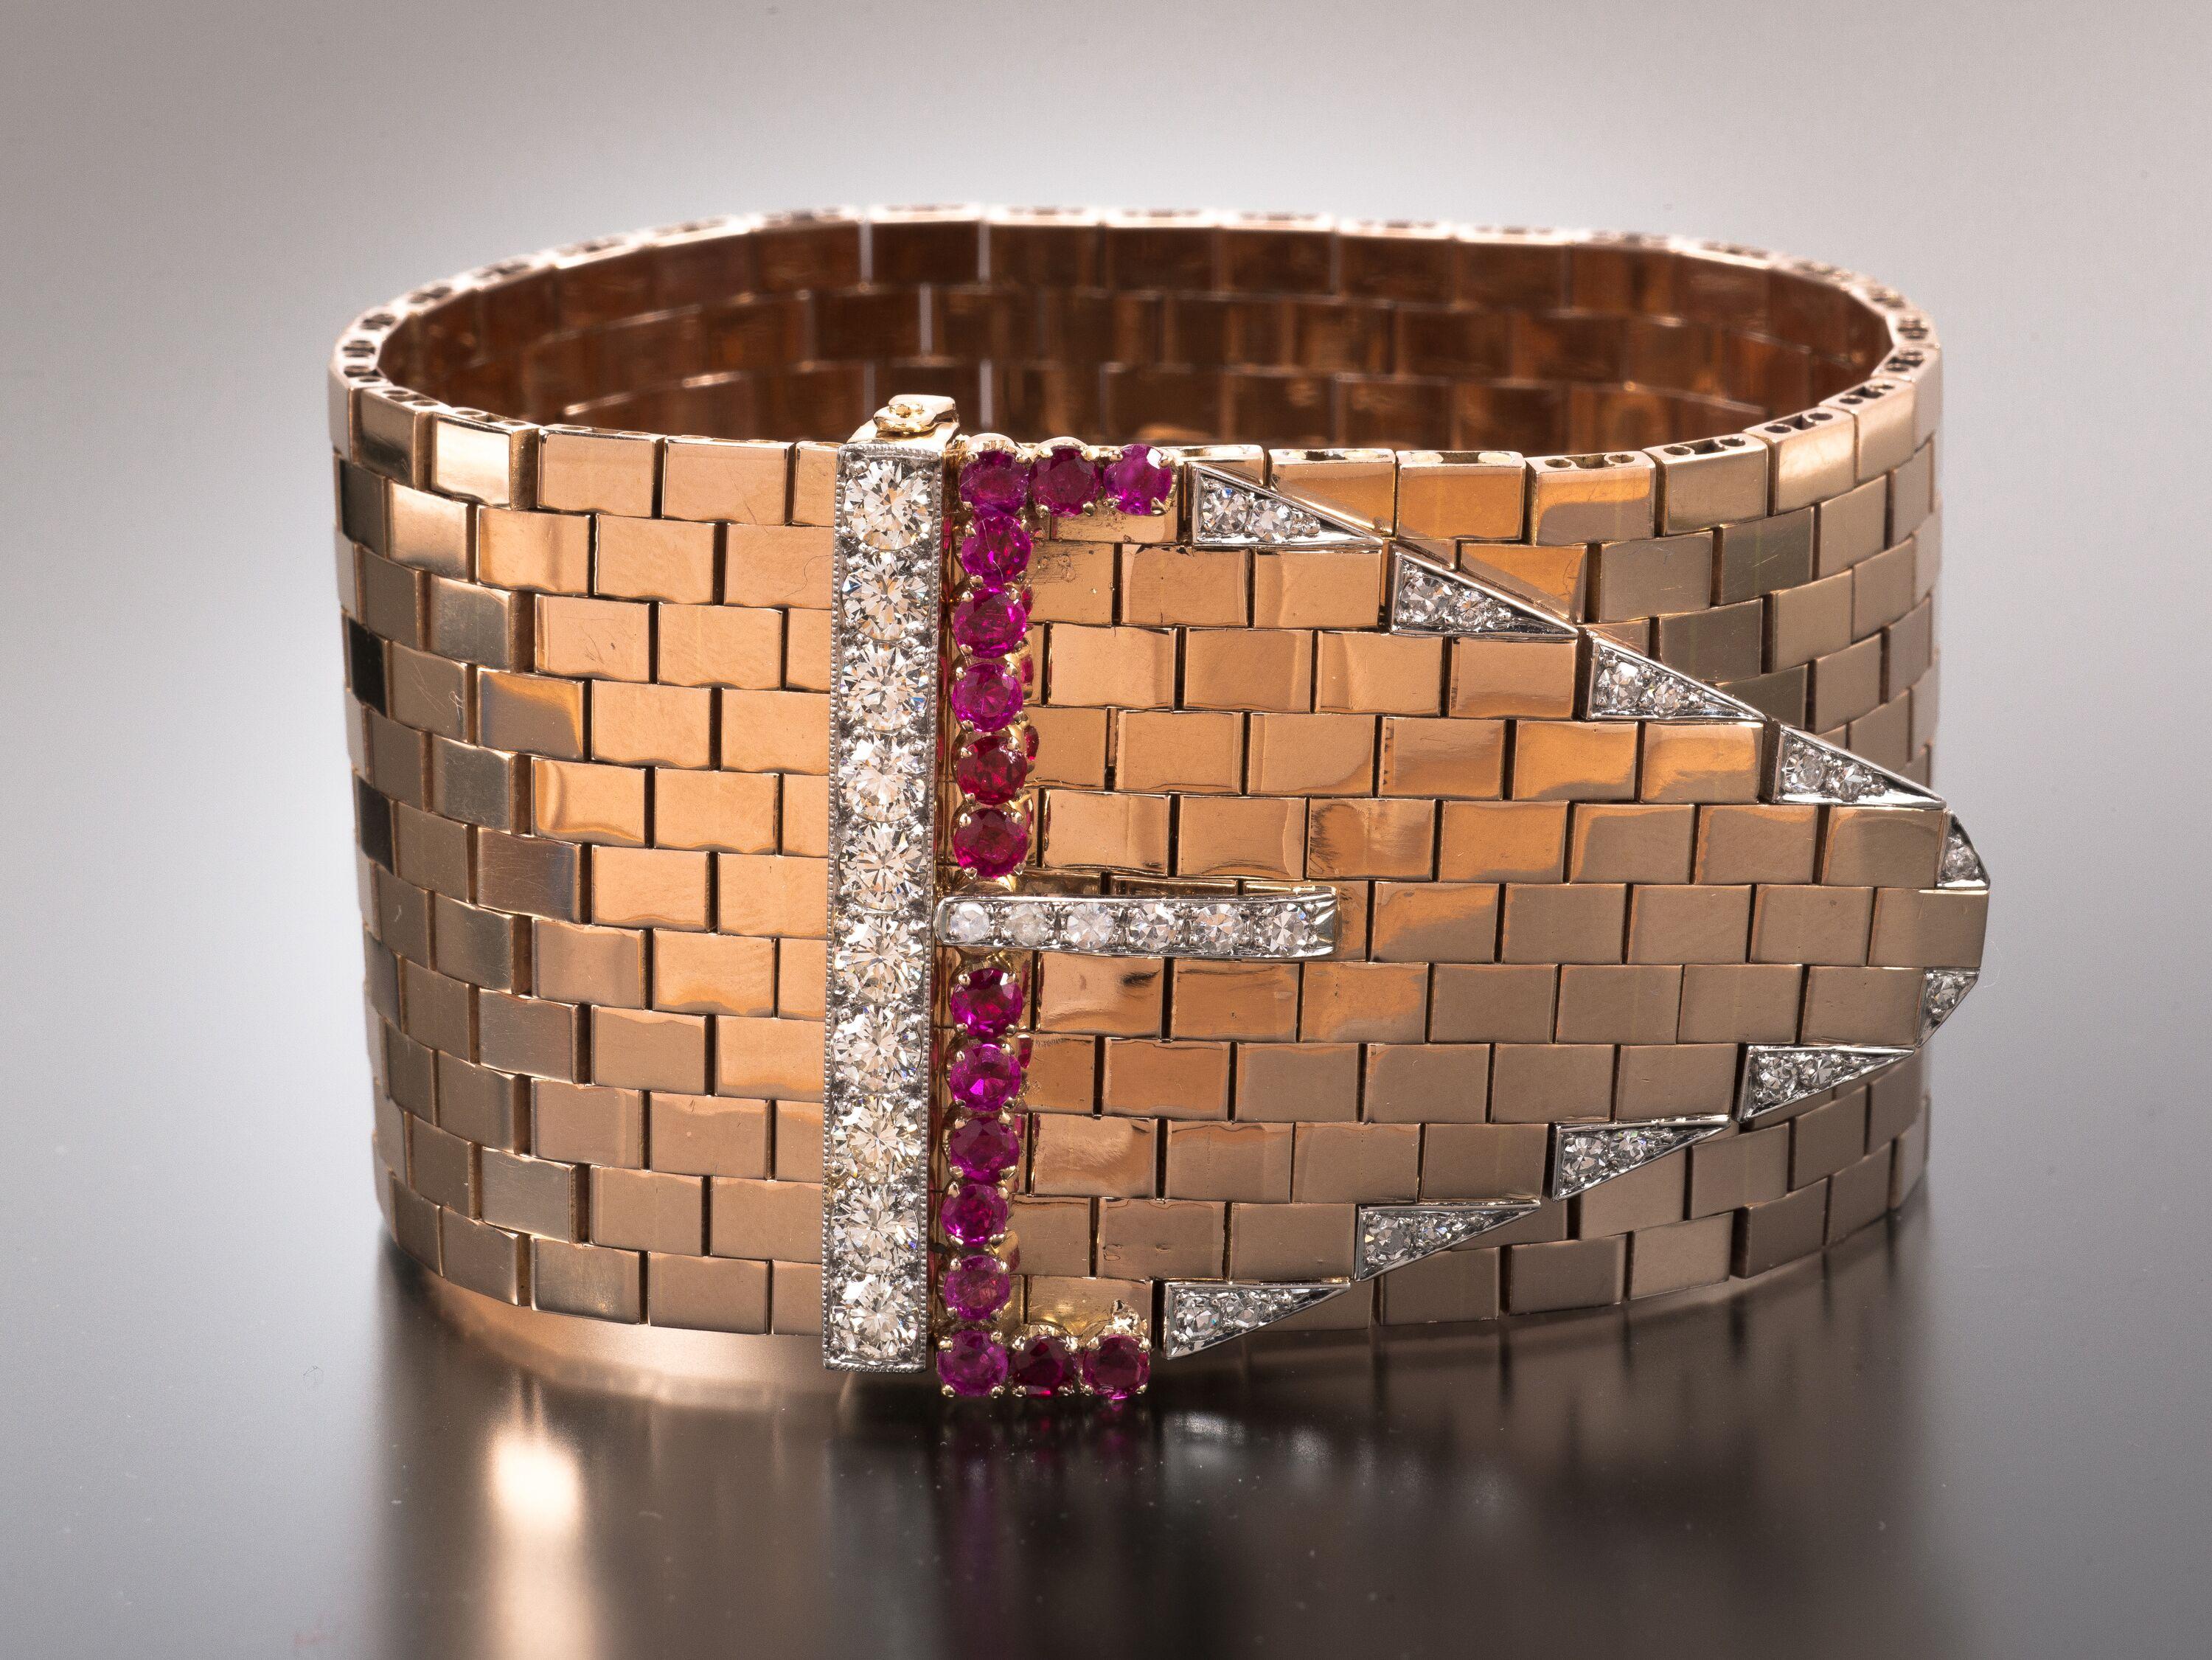 Designed as an articulated belt strap made of 18k rose gold brick links with a buckle enhanced by round brilliant-cut diamonds and circle-cut rubies, this 1940s-era Bulgari bracelet is a classic example of the Retro style. Perfectly representative